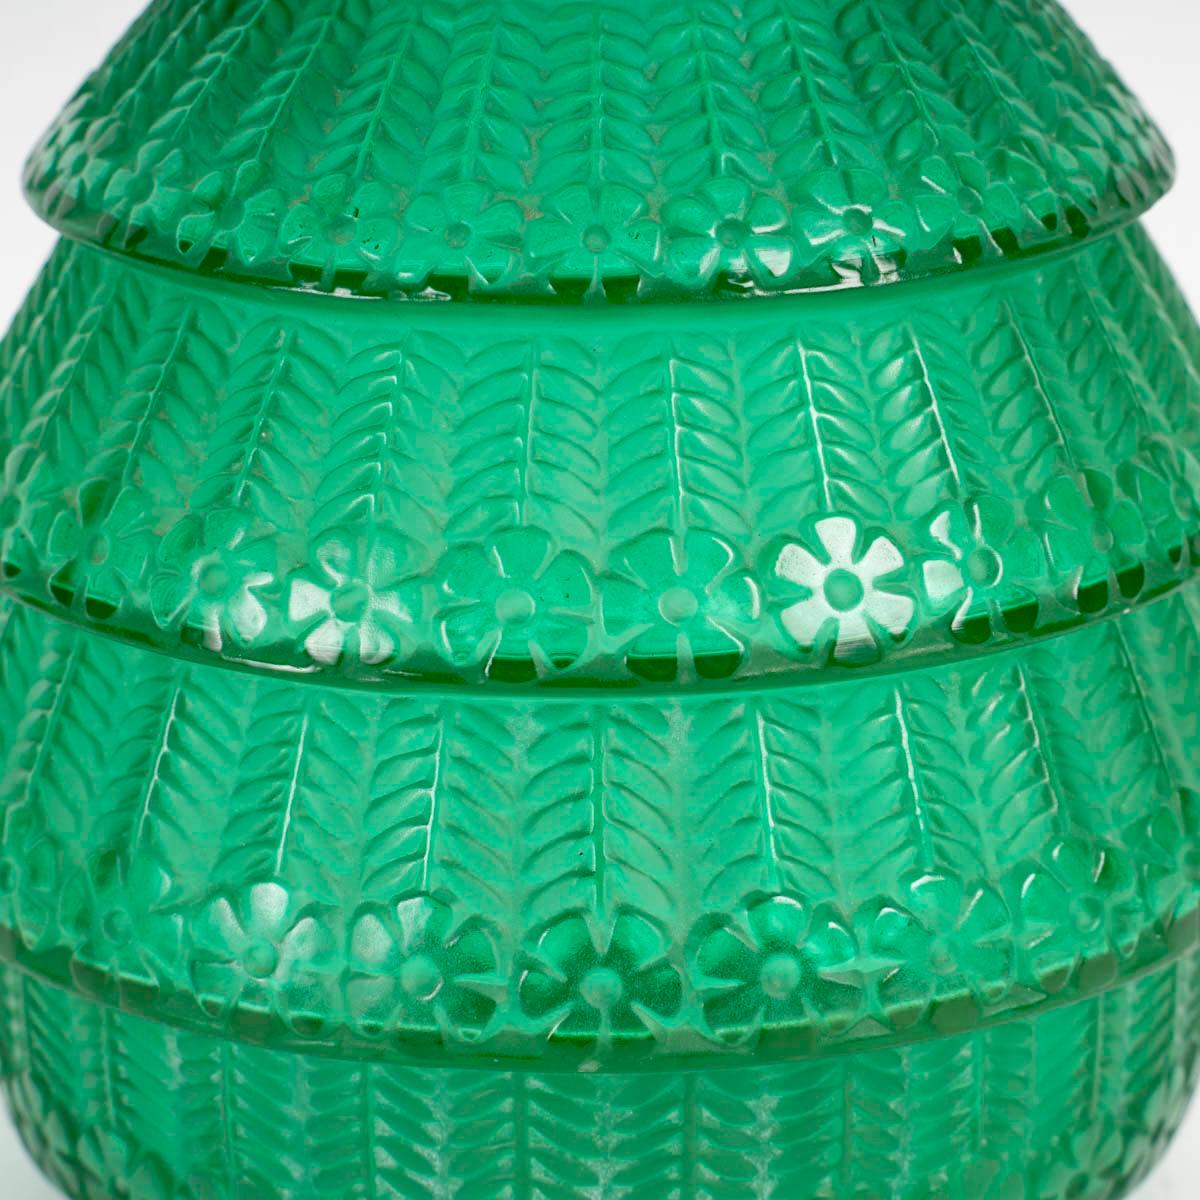 Molded 1929 René Lalique - Vase Ferrieres Emerald Green Glass For Sale